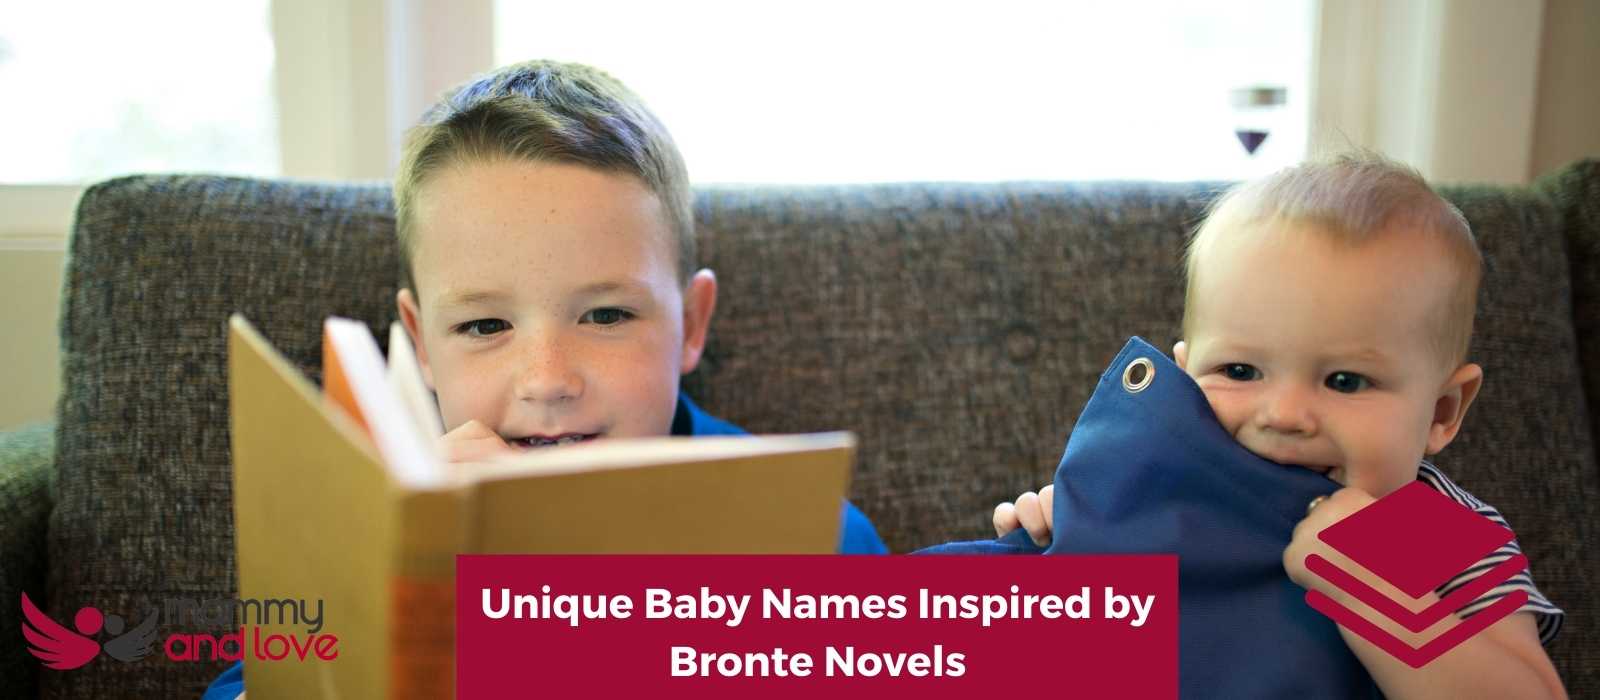 Unique Baby Names Inspired by Bronte Novels